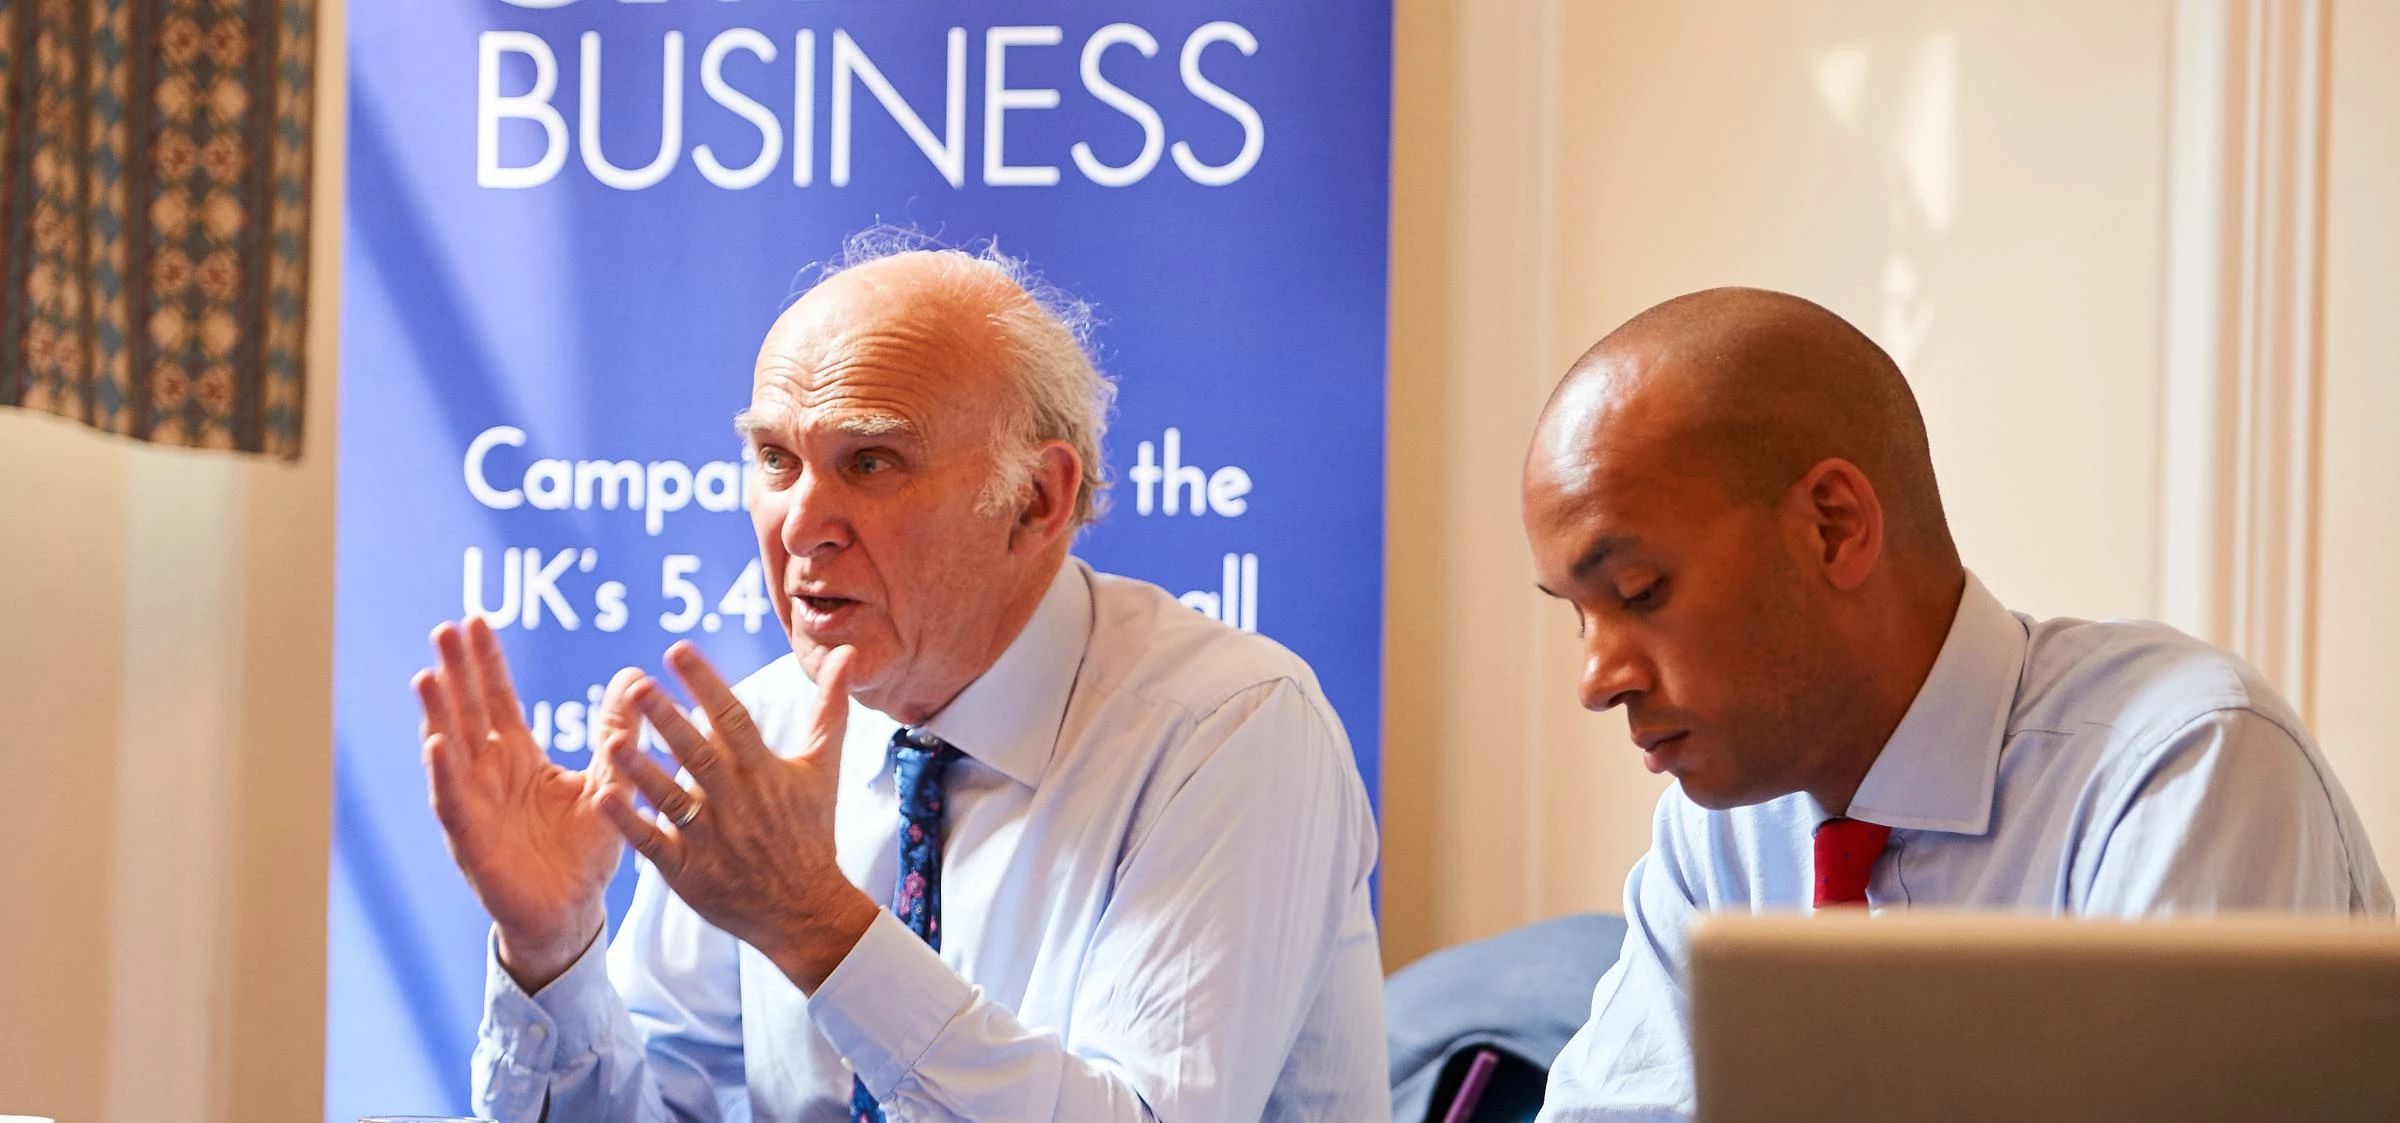 Former Business Secretary Sir Vince Cable & former Shadow Business Secretary Chuka Umunna urge small